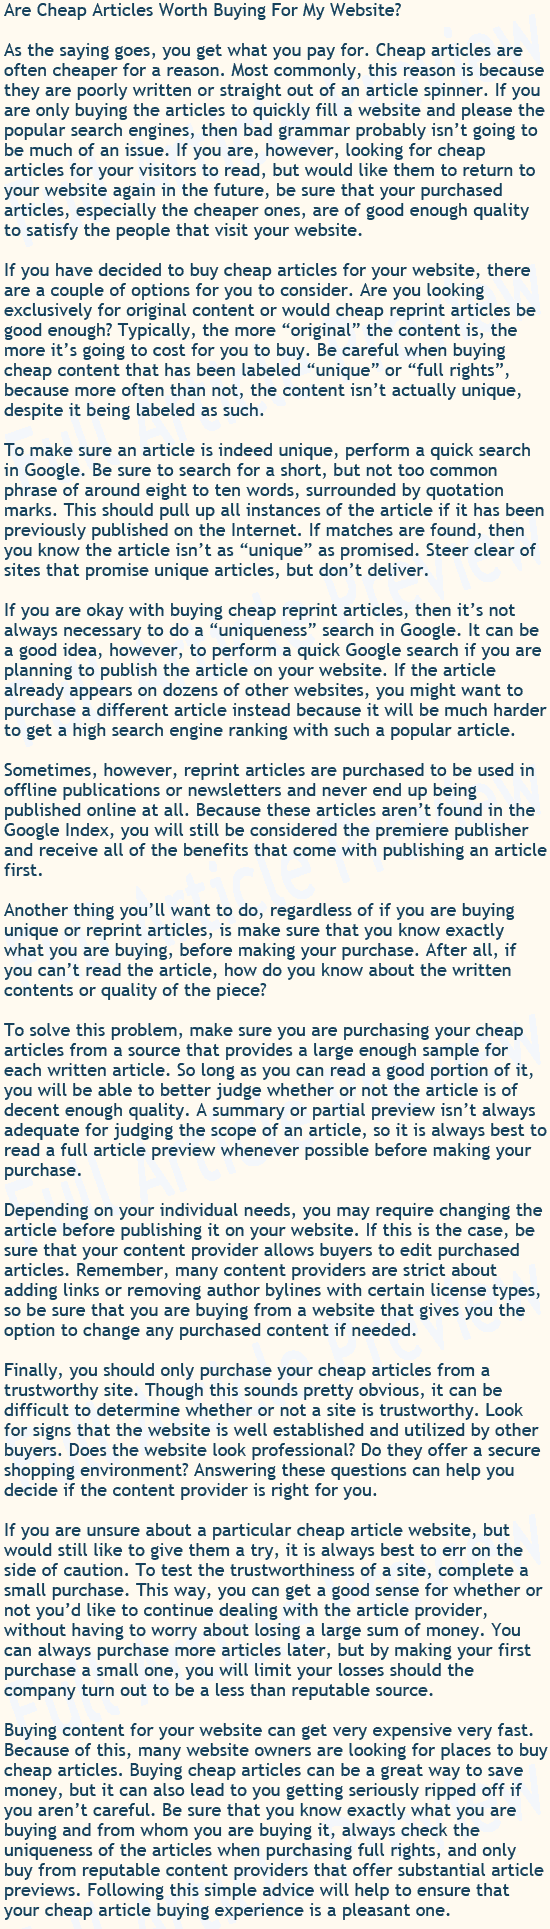 This article talks about buying cheap articles for your website.